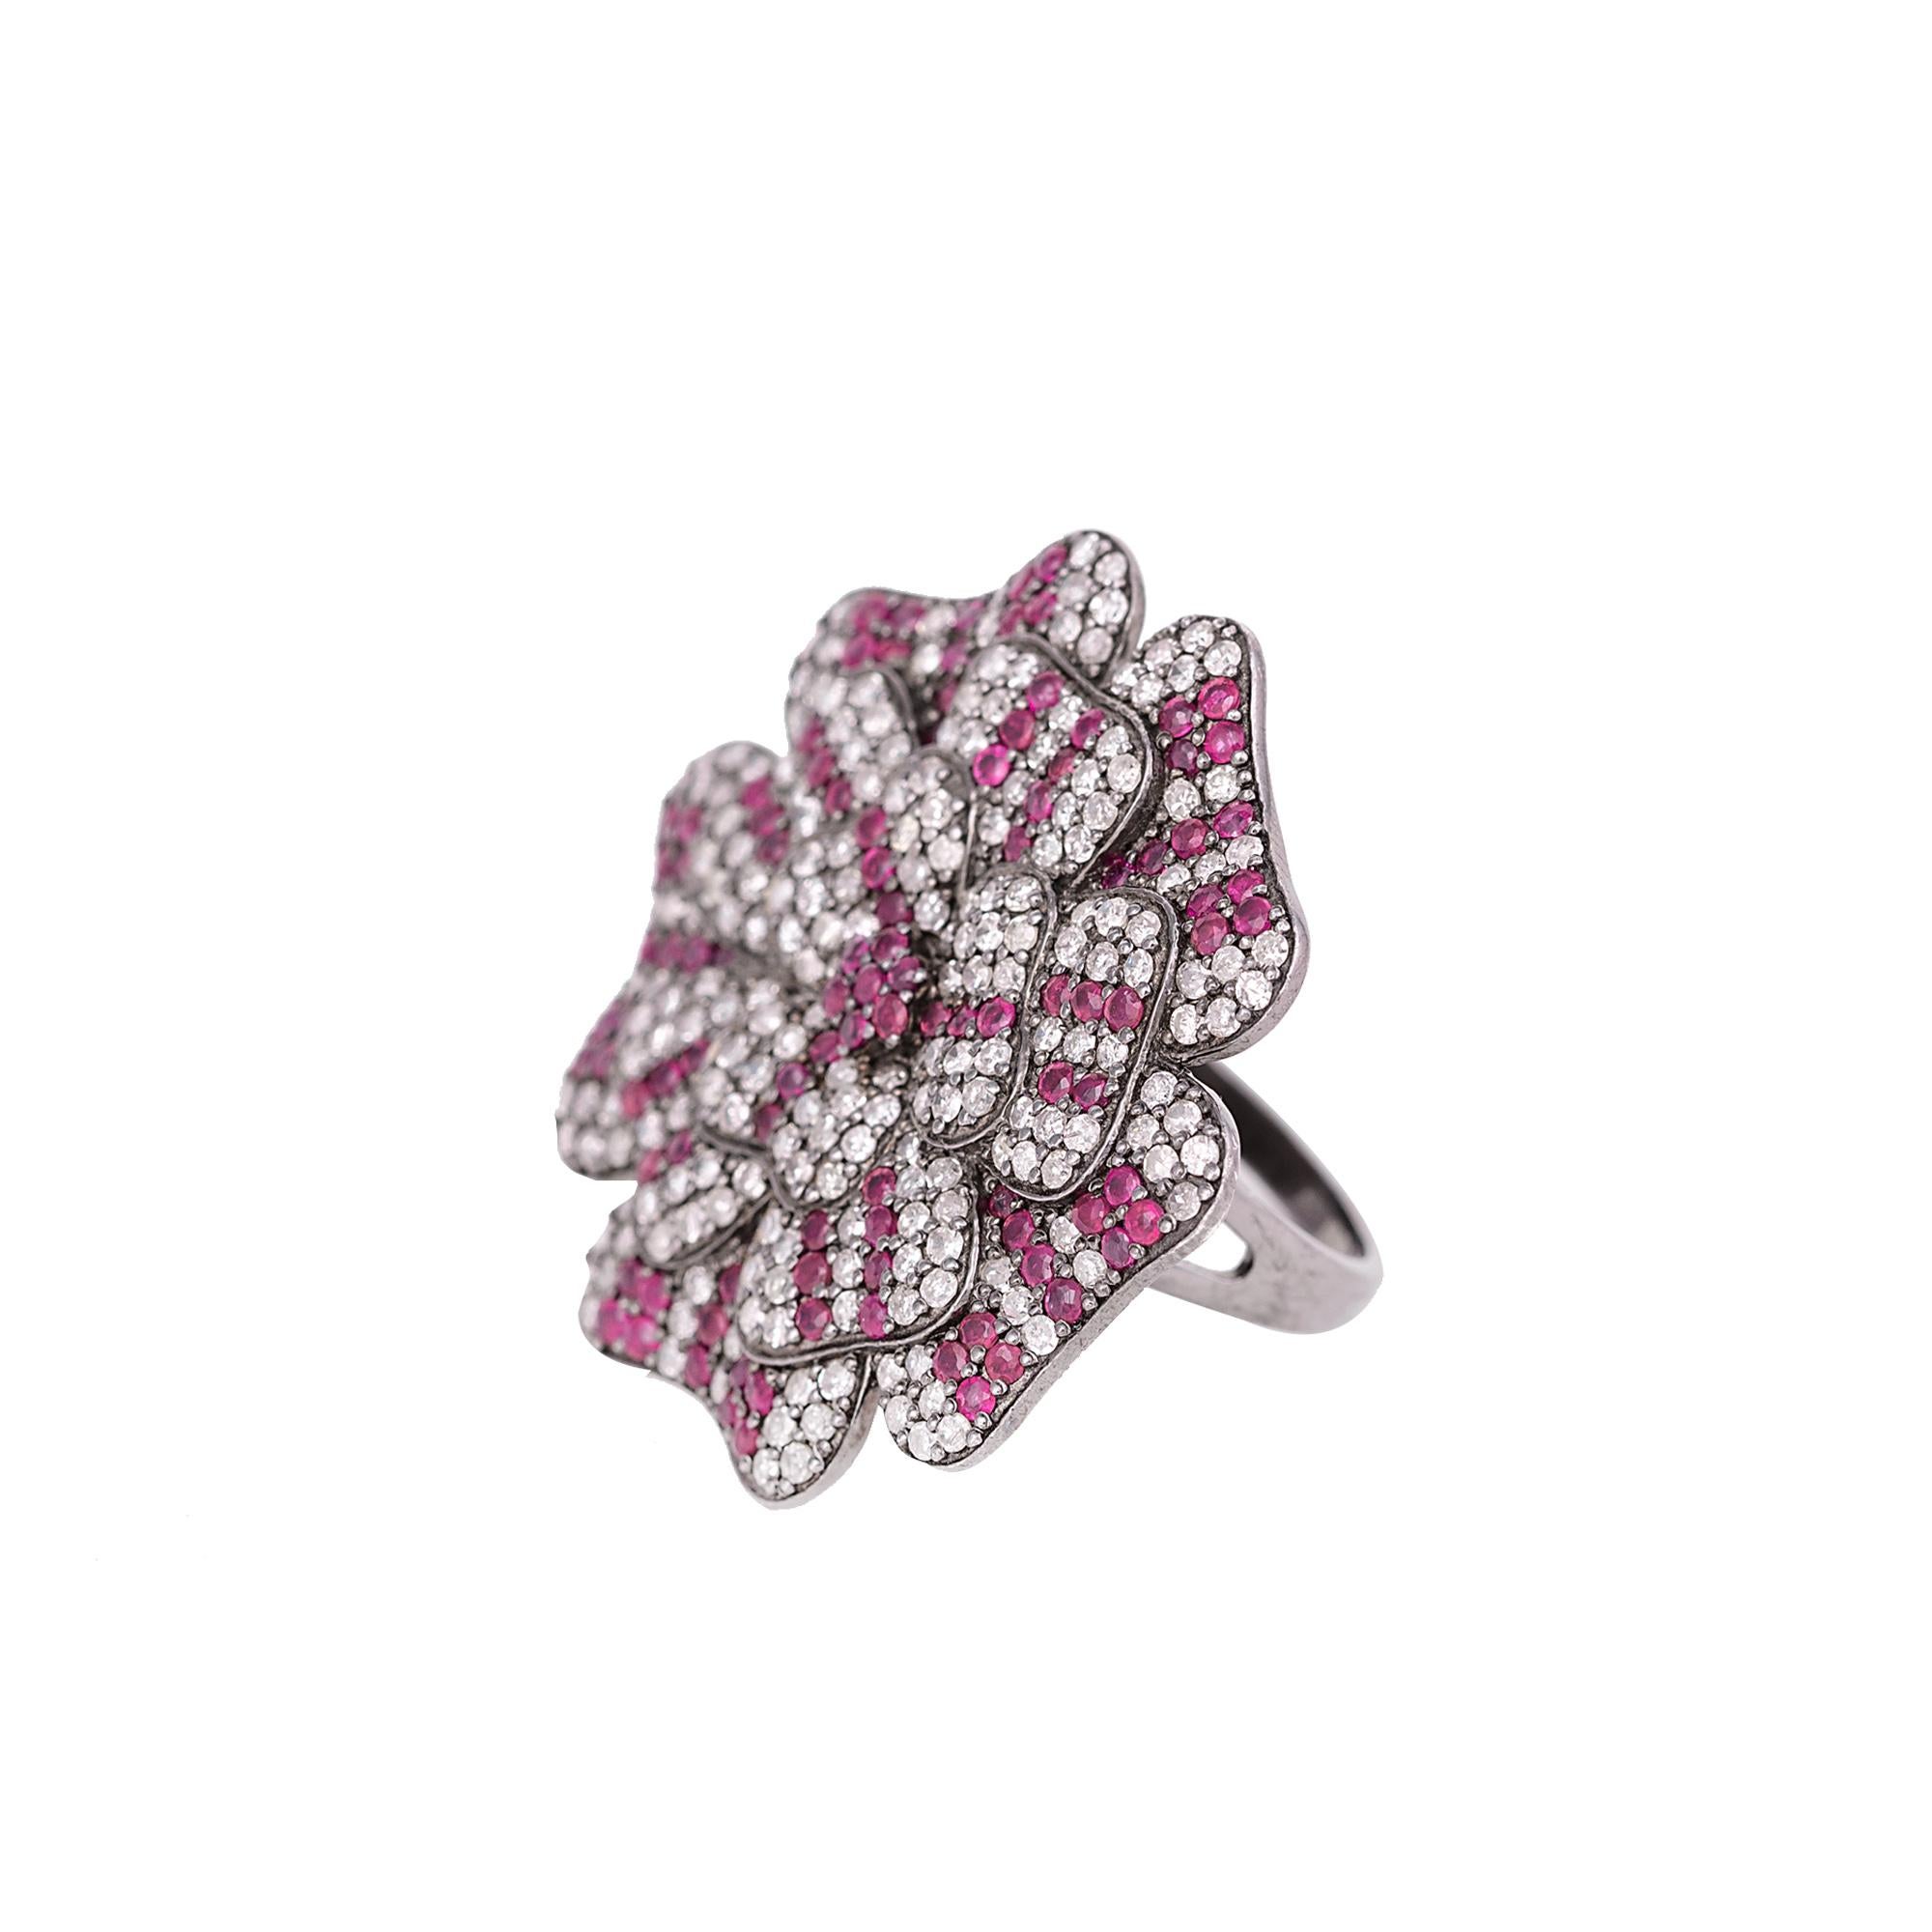 Women's 2.37 Carat Diamond and Ruby Flower Statement Fashion Ring in Victorian Style For Sale